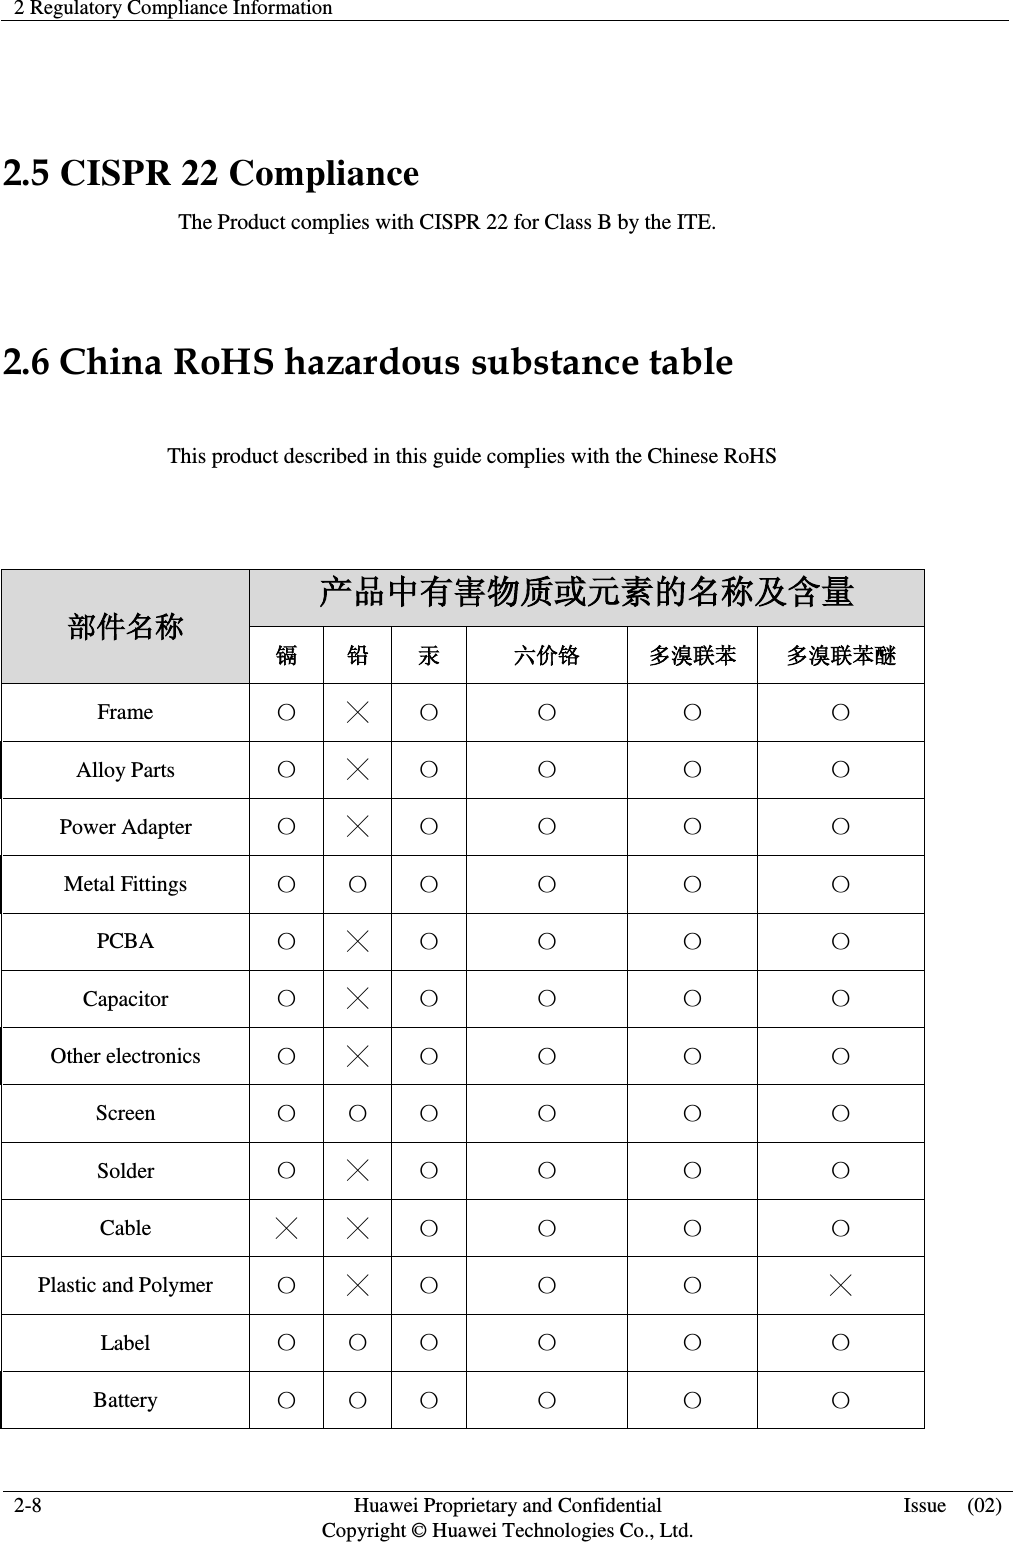 2 Regulatory Compliance Information    2-8 Huawei Proprietary and Confidential         Copyright © Huawei Technologies Co., Ltd. Issue    (02)   2.5 CISPR 22 Compliance                                 The Product complies with CISPR 22 for Class B by the ITE.  2.6 China RoHS hazardous substance table                                This product described in this guide complies with the Chinese RoHS   部名称 产品中有害物质或元素的名称及含量 镉 铅 汞 六铬 多溴联苯 多溴联苯醚 Frame 〇 ╳ 〇 〇 〇 〇 Alloy Parts 〇 ╳ 〇 〇 〇 〇 Power Adapter 〇 ╳ 〇 〇 〇 〇 Metal Fittings 〇 〇 〇 〇 〇 〇 PCBA 〇 ╳ 〇 〇 〇 〇 Capacitor 〇 ╳ 〇 〇 〇 〇 Other electronics 〇 ╳ 〇 〇 〇 〇 Screen 〇 〇 〇 〇 〇 〇 Solder 〇 ╳ 〇 〇 〇 〇 Cable ╳ ╳ 〇 〇 〇 〇 Plastic and Polymer 〇 ╳ 〇 〇 〇 ╳ Label 〇 〇 〇 〇 〇 〇 Battery 〇 〇 〇 〇 〇 〇 